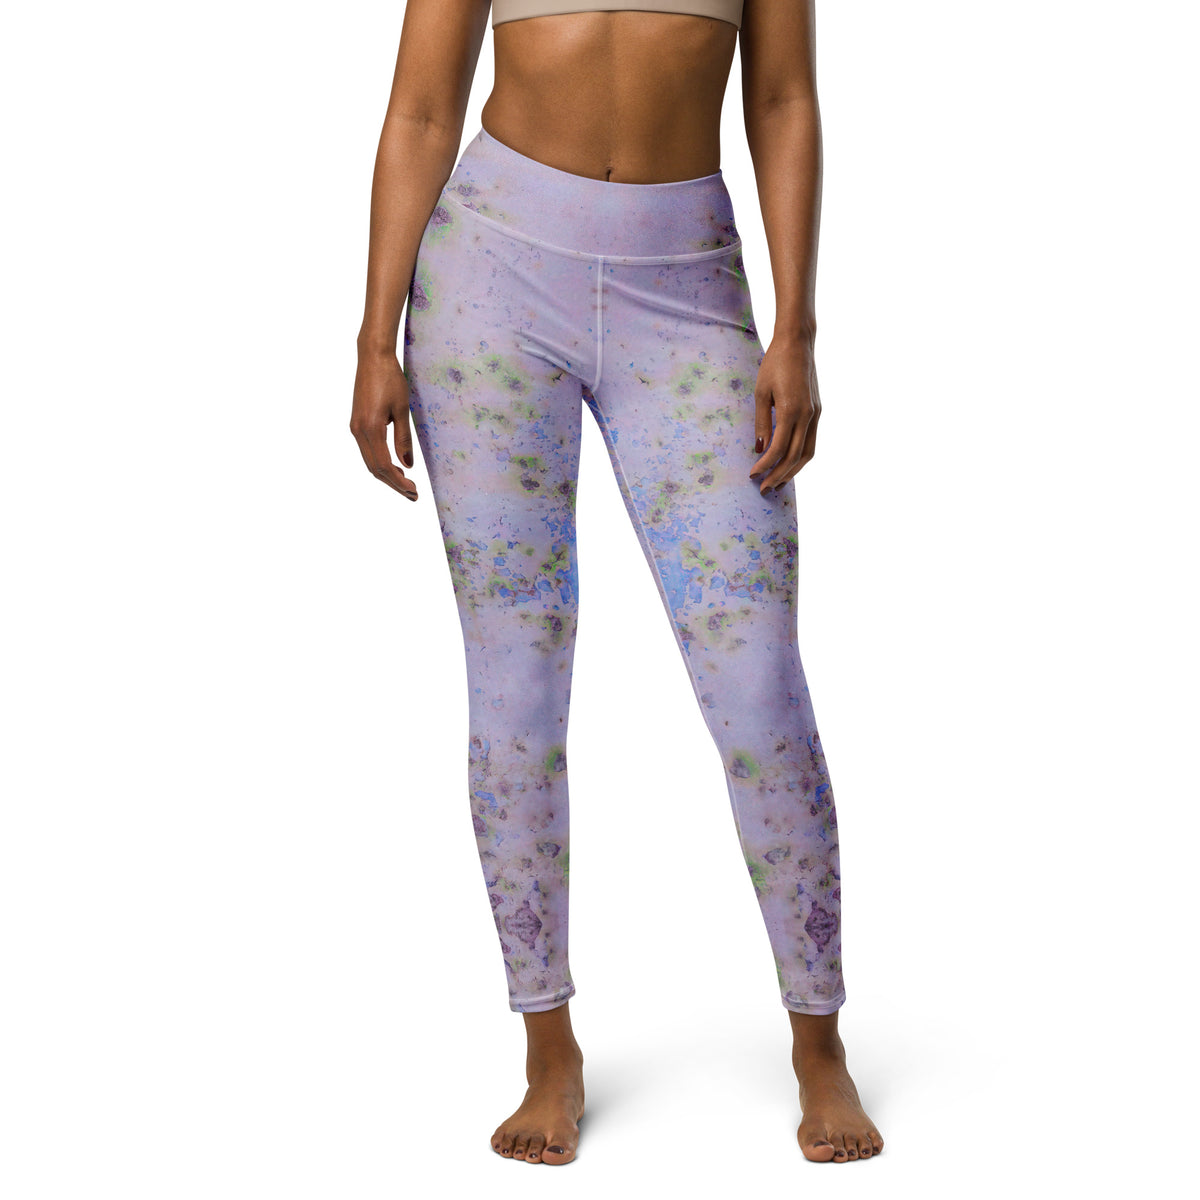 Honeycomb Bliss Yoga Leggings for Optimal Stretch and Support